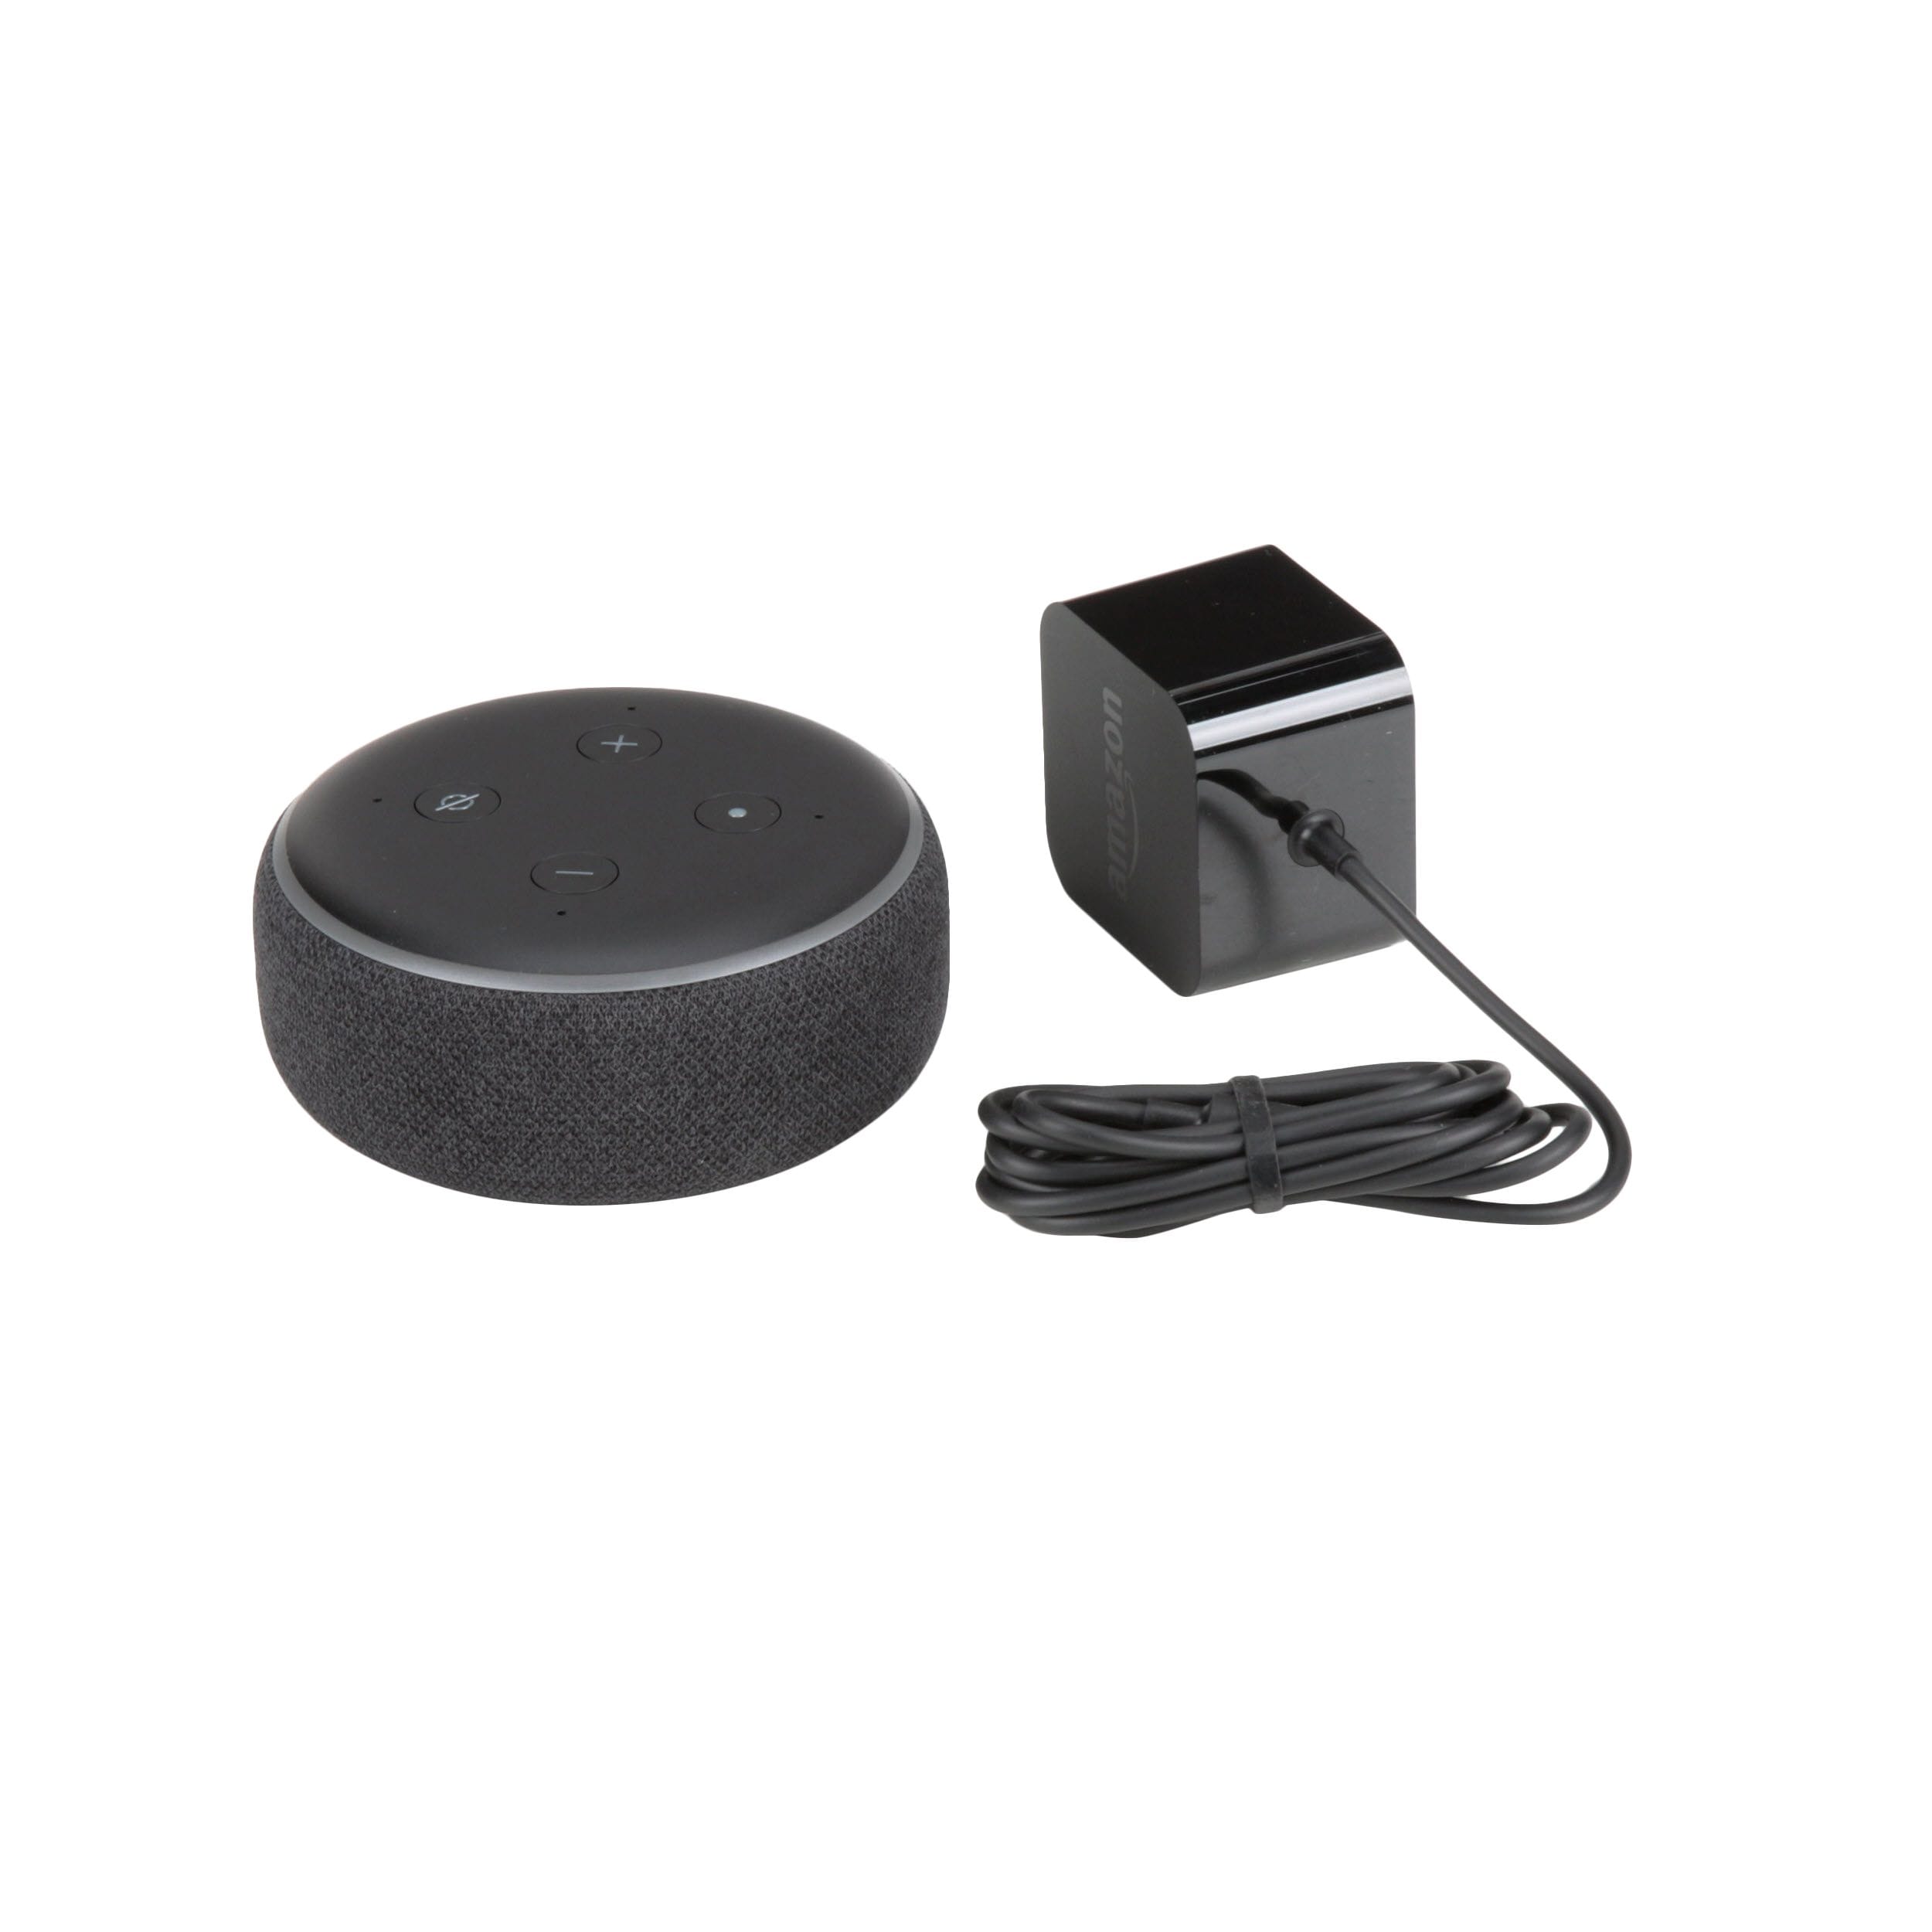 B07FZ8S74R - $60 -  Echo Dot 3rd Generation Smart Speaker CHARCOAL :  Chromecast Support, Alexa Built-In, Android / iOS Compatible